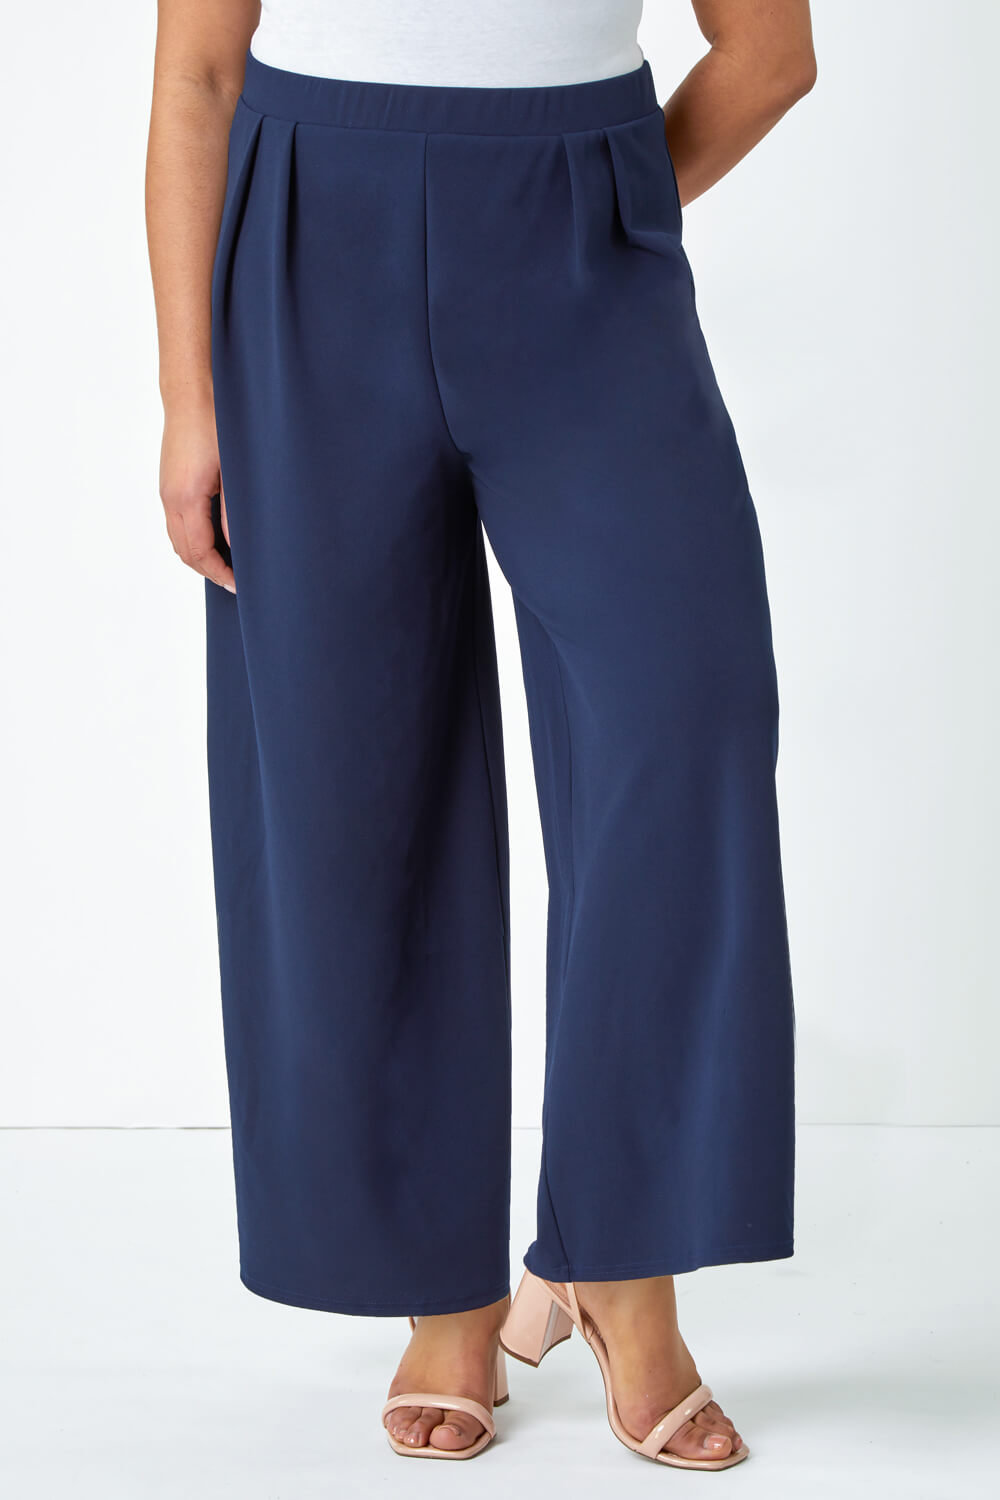 Navy  Curve Wide Leg Pleat Stretch Trousers, Image 4 of 5